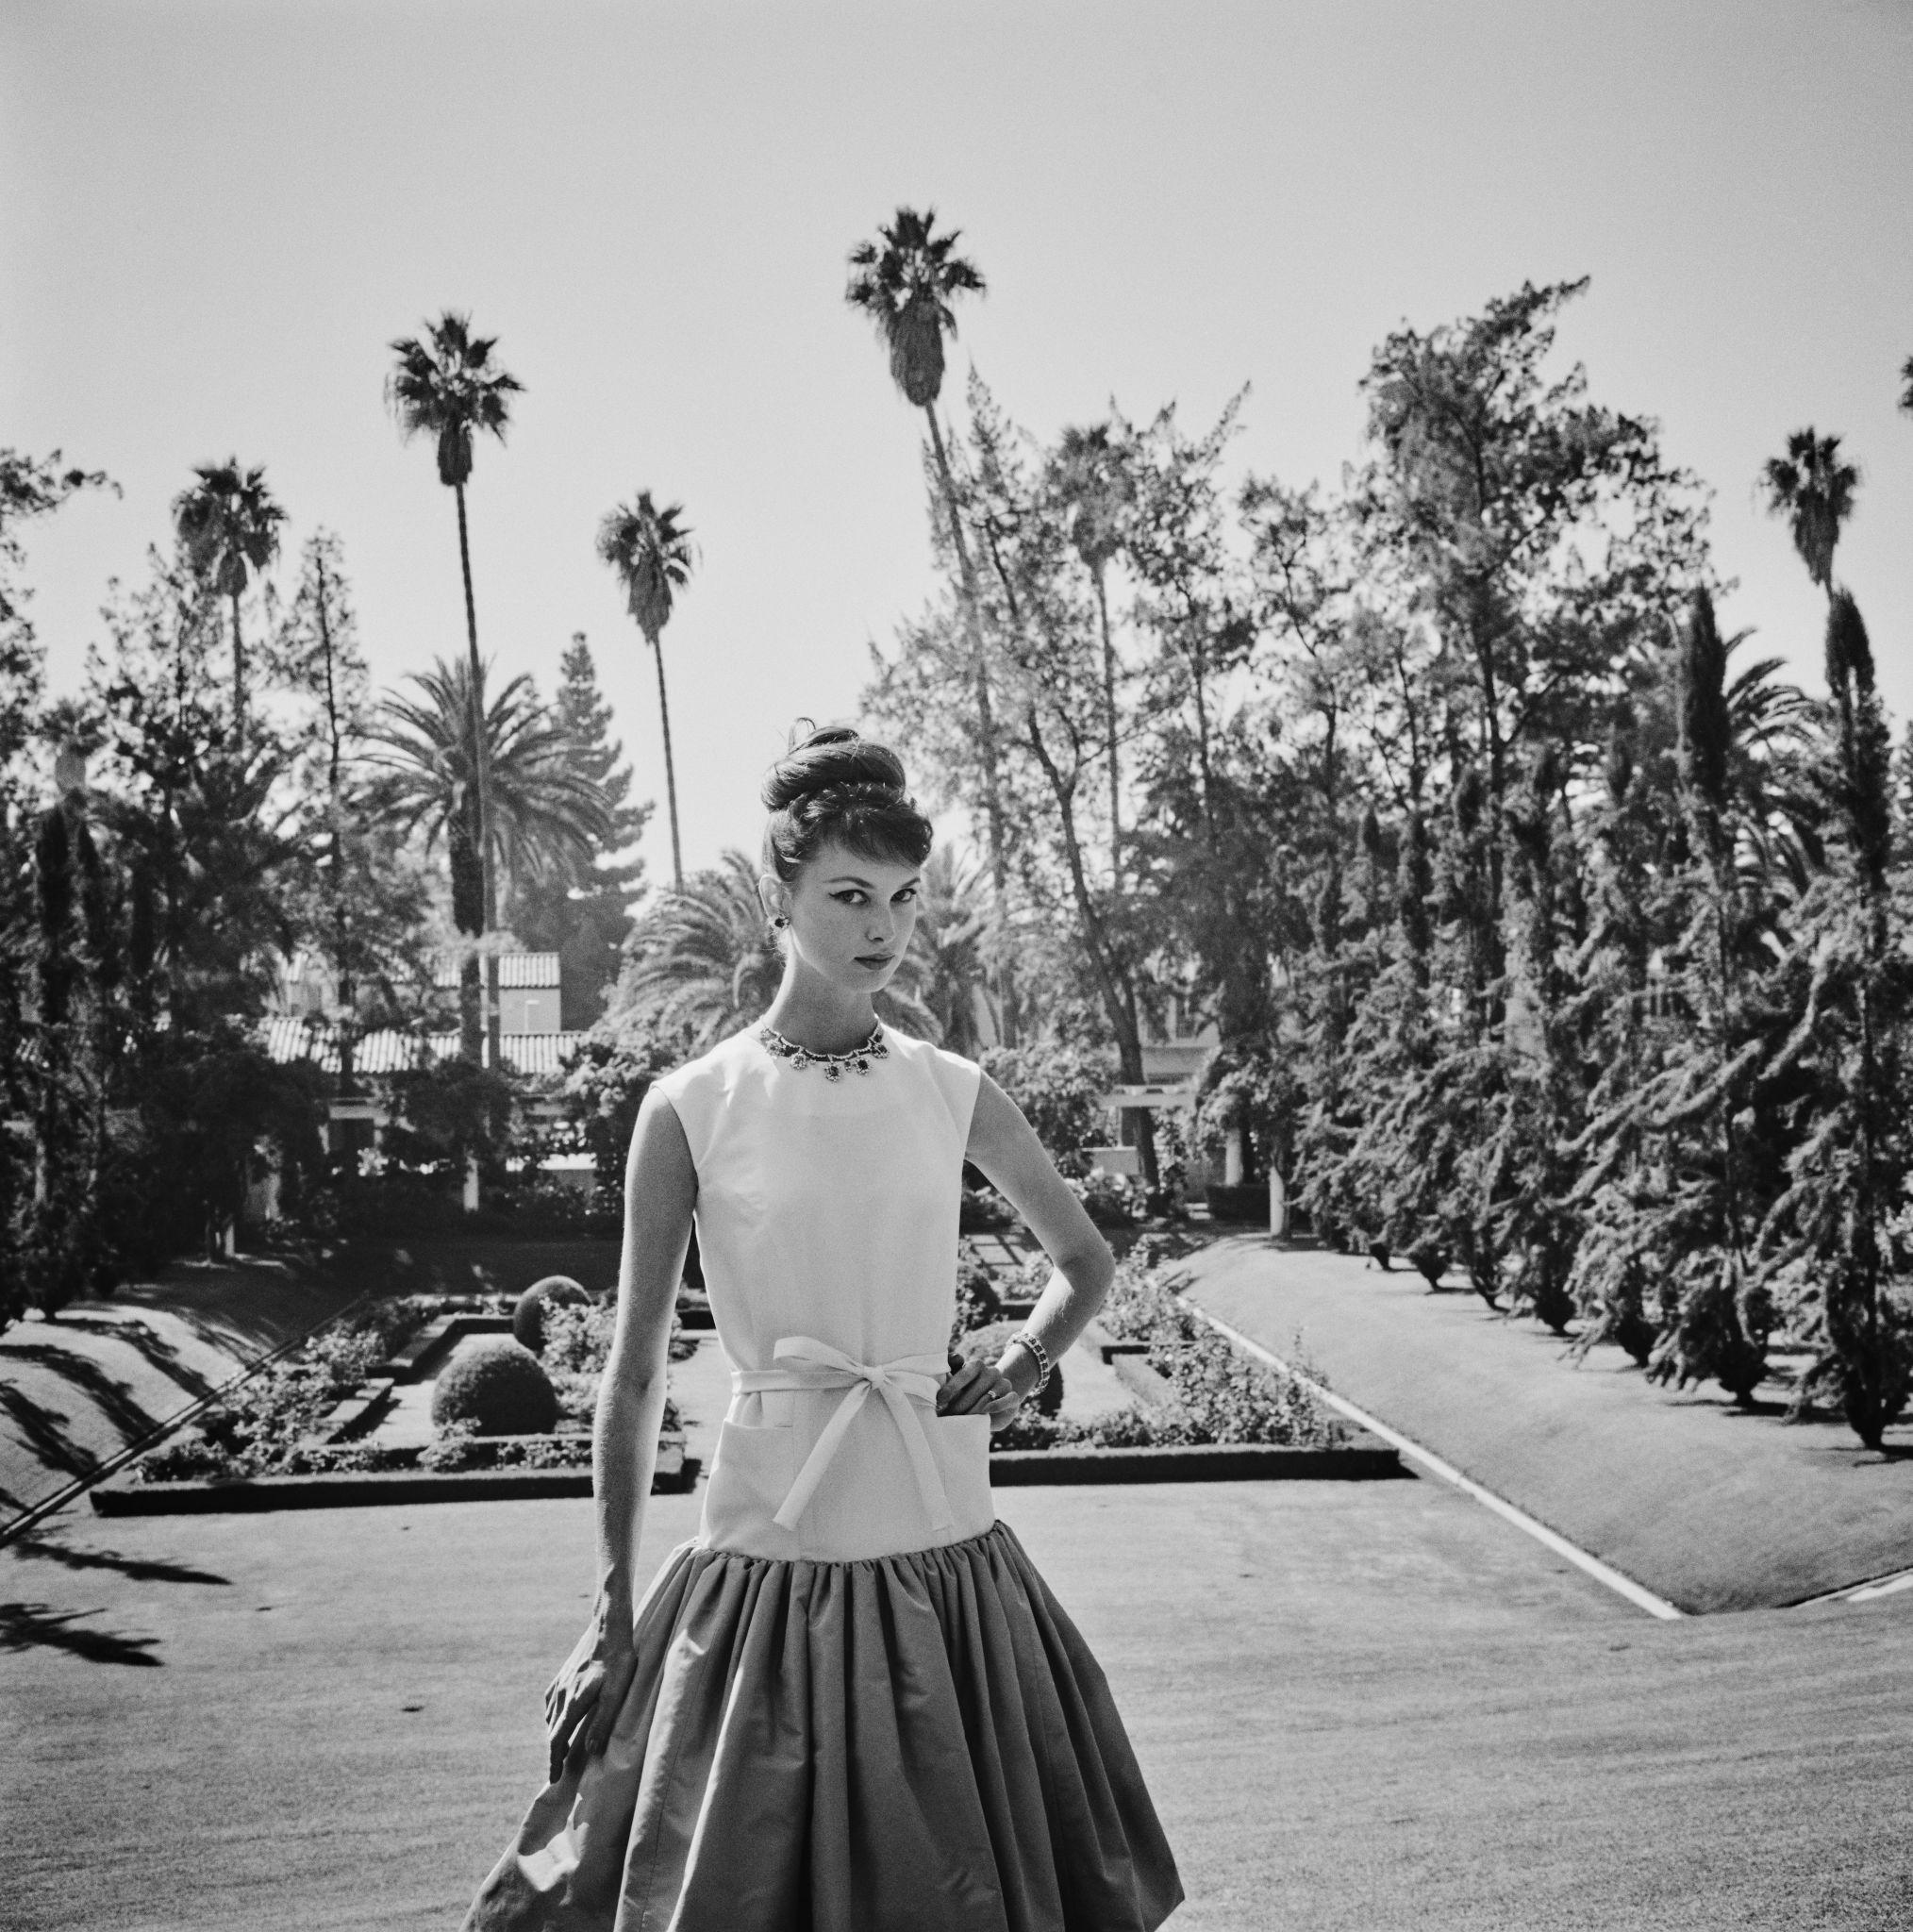 Slim Aarons
Gretchen Van de Kamp Ward In Gustave Tassell
1960 (printed later)
Silver gelatin print
estate signature stamped edition of 150 
with certificate of authenticity

Model Gretchen Van de Kamp Ward wearing a dinner dress by Gustave Tassell,